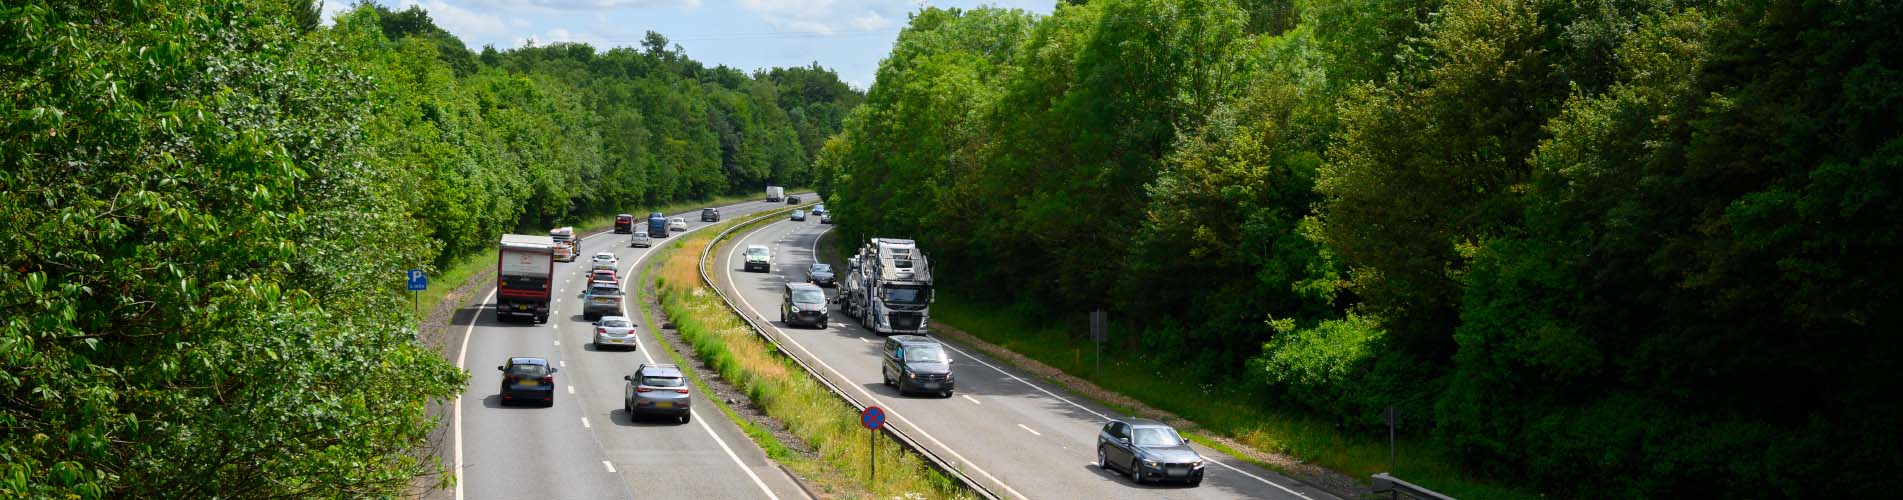 A dual carriageway in England with vehicles driving on it. Tall green trees line the side of the dual carriageway.